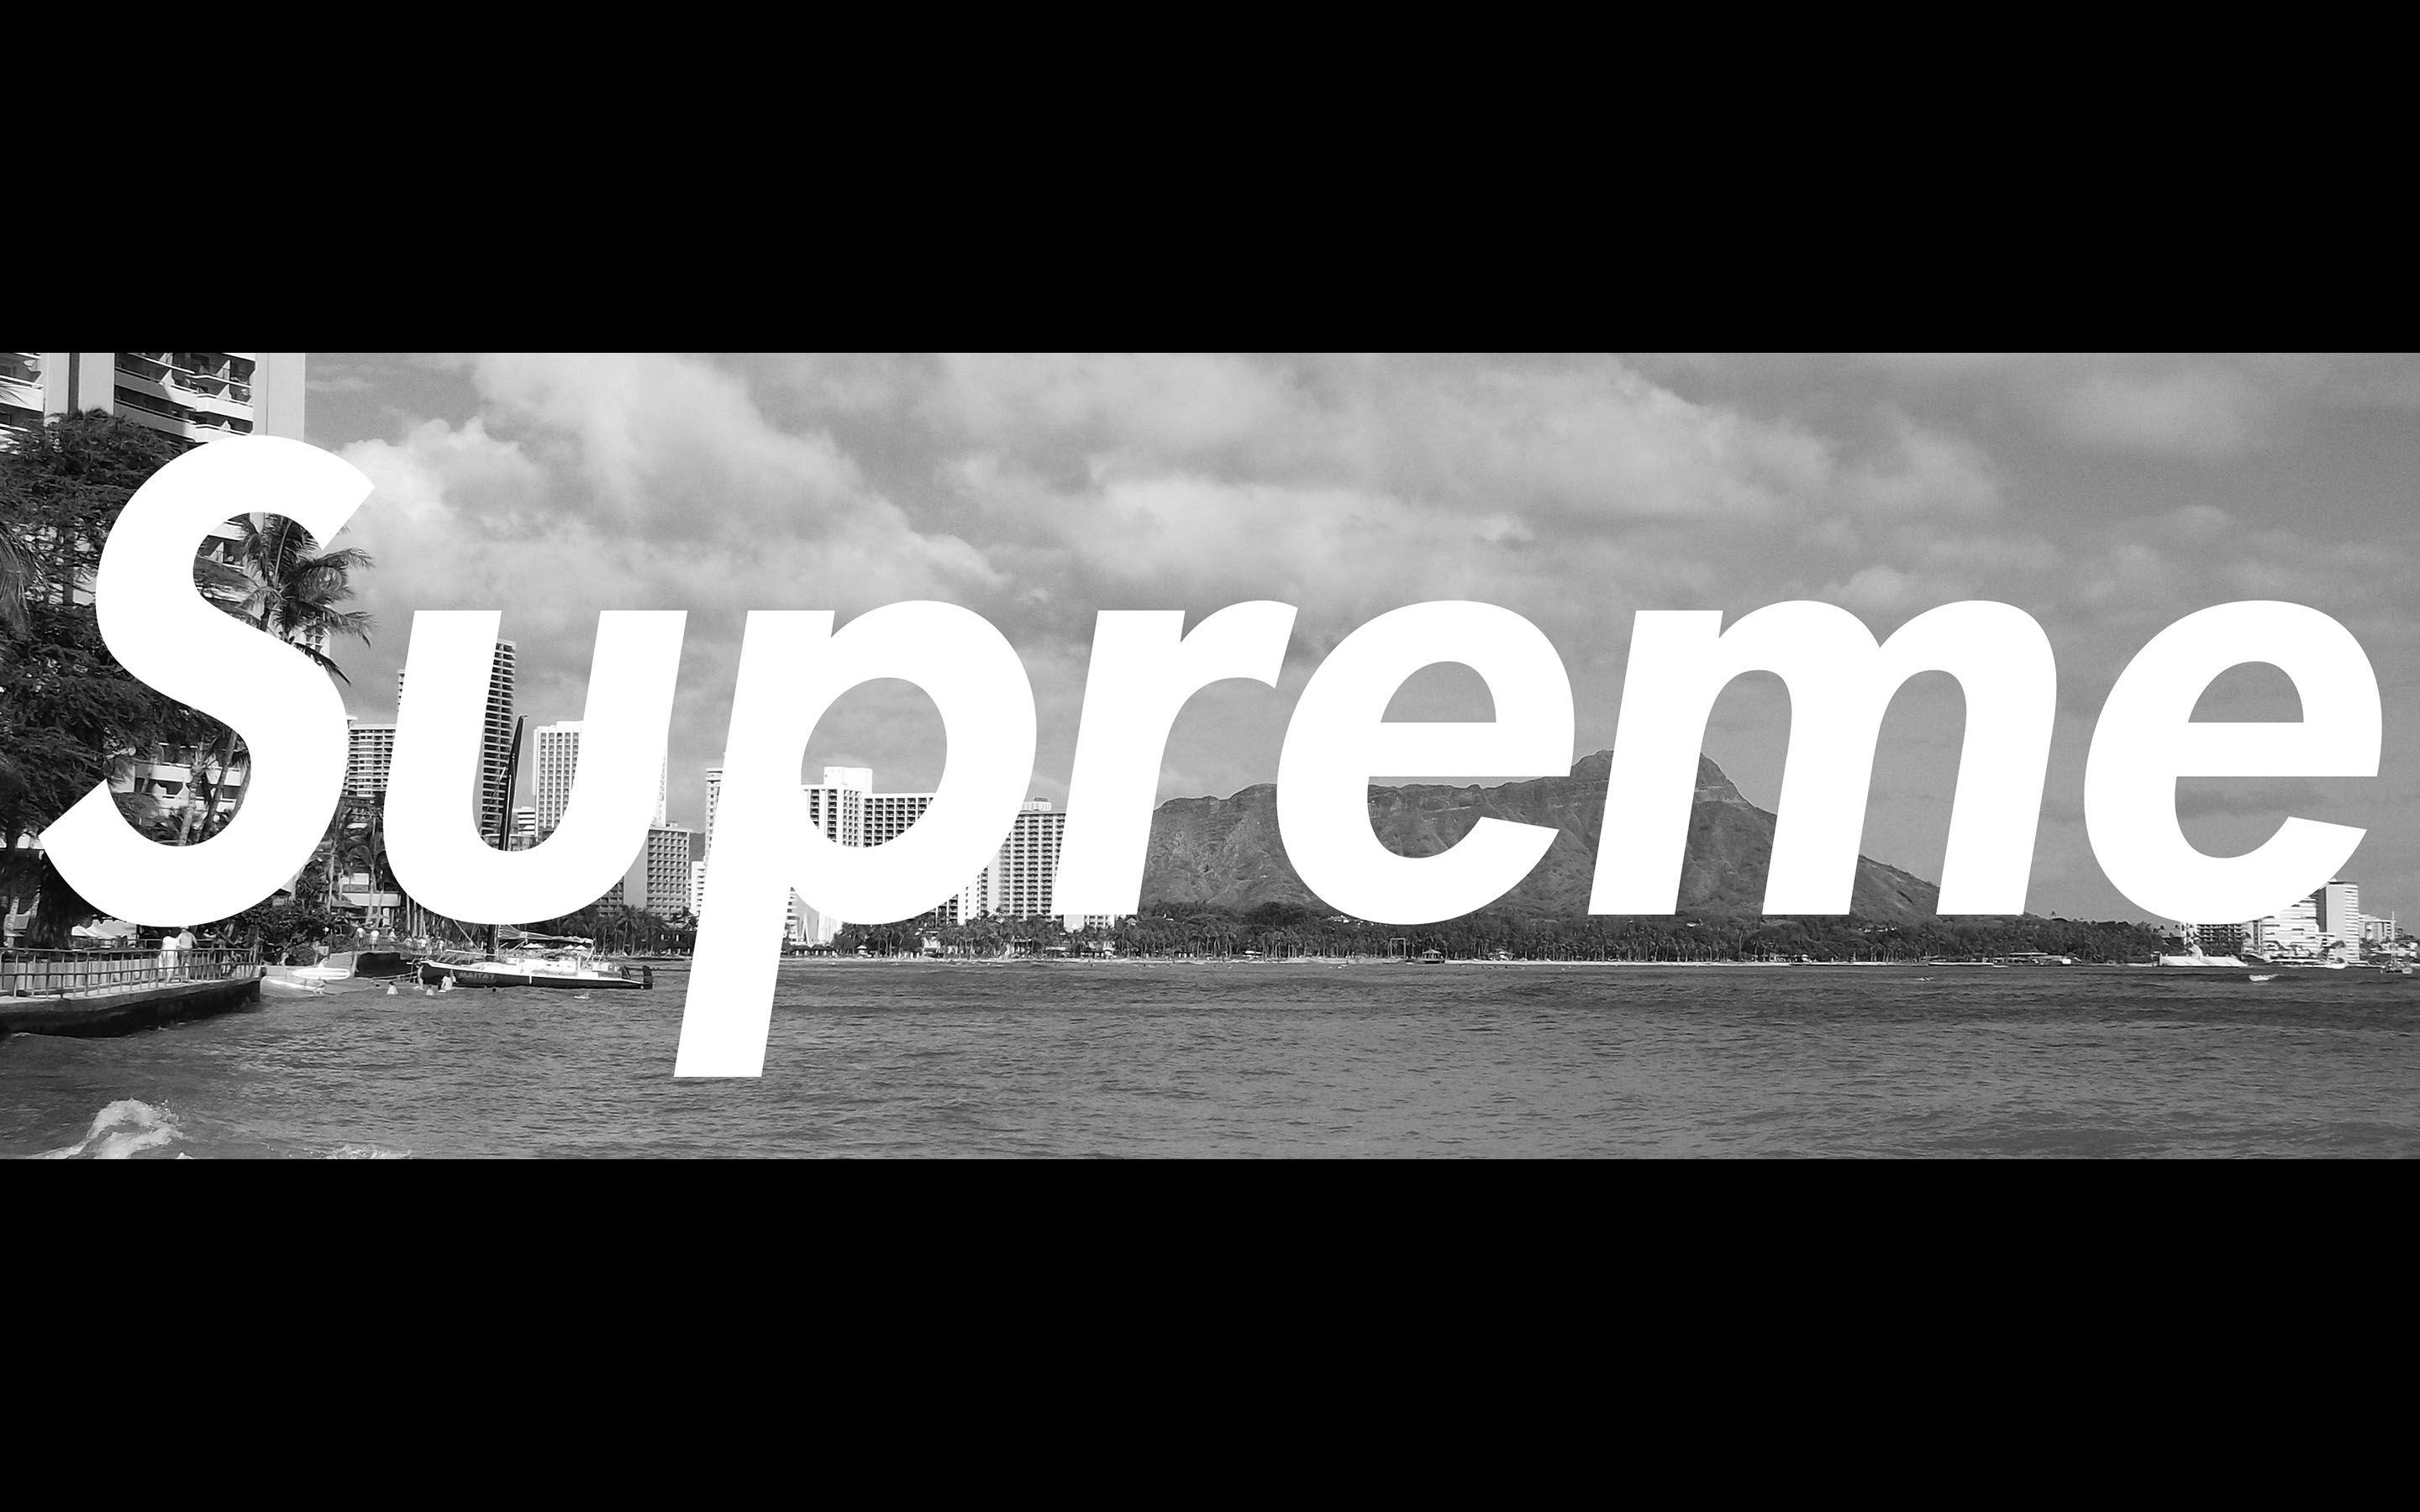 Supreme Wallpaper Wallpaper Background of Your Choice